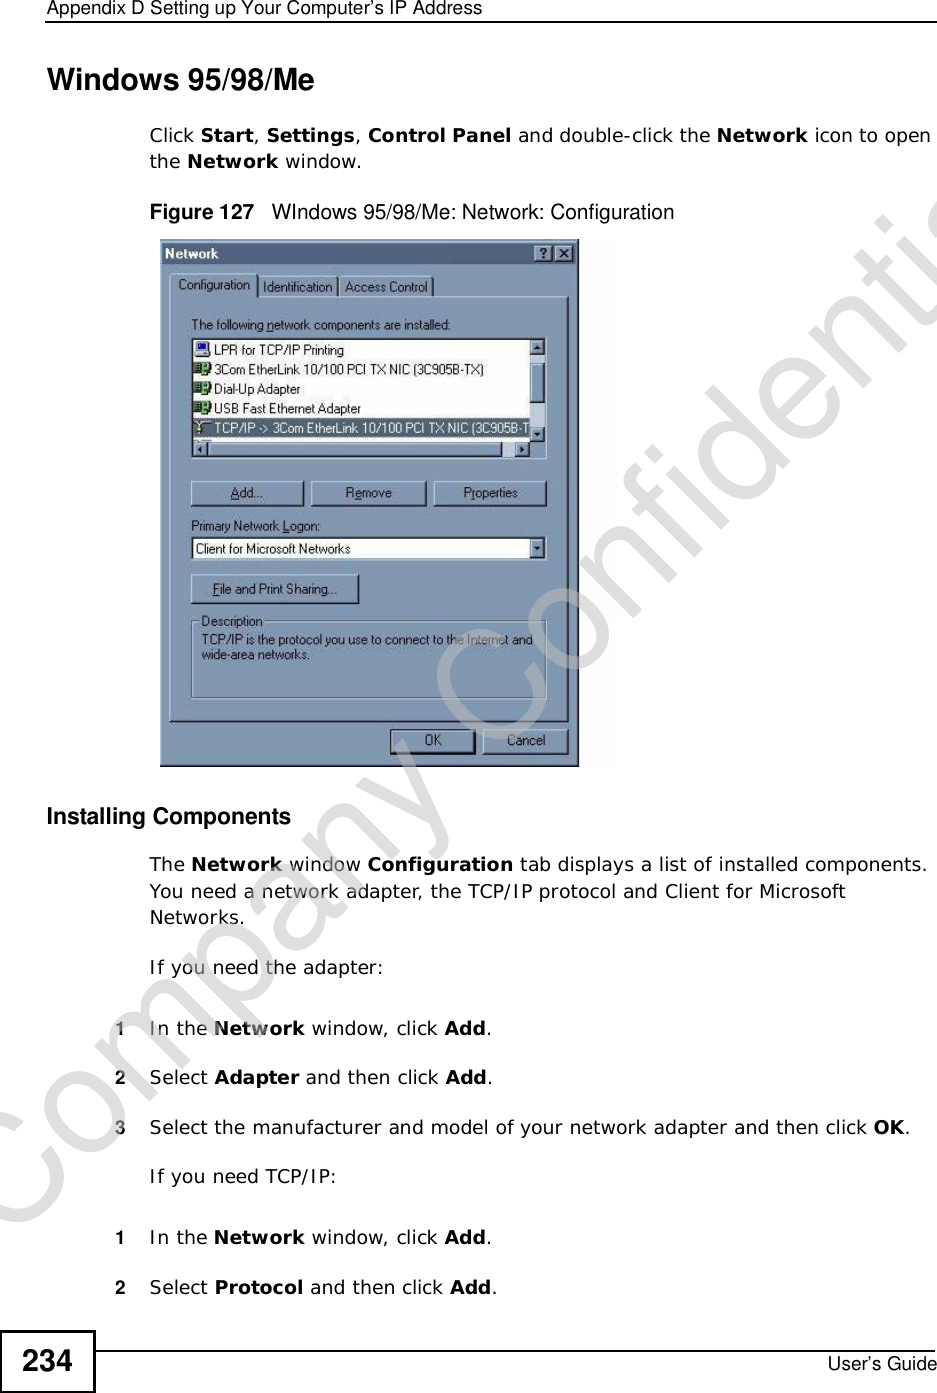 Appendix DSetting up Your Computer’s IP AddressUser’s Guide234Windows 95/98/MeClick Start,Settings,Control Panel and double-click the Network icon to open the Network window.Figure 127   WIndows 95/98/Me: Network: ConfigurationInstalling ComponentsThe Network window Configuration tab displays a list of installed components. You need a network adapter, the TCP/IP protocol and Client for Microsoft Networks.If you need the adapter:1In the Network window, click Add.2Select Adapter and then click Add.3Select the manufacturer and model of your network adapter and then click OK.If you need TCP/IP:1In the Network window, click Add.2Select Protocol and then click Add.Company Confidential